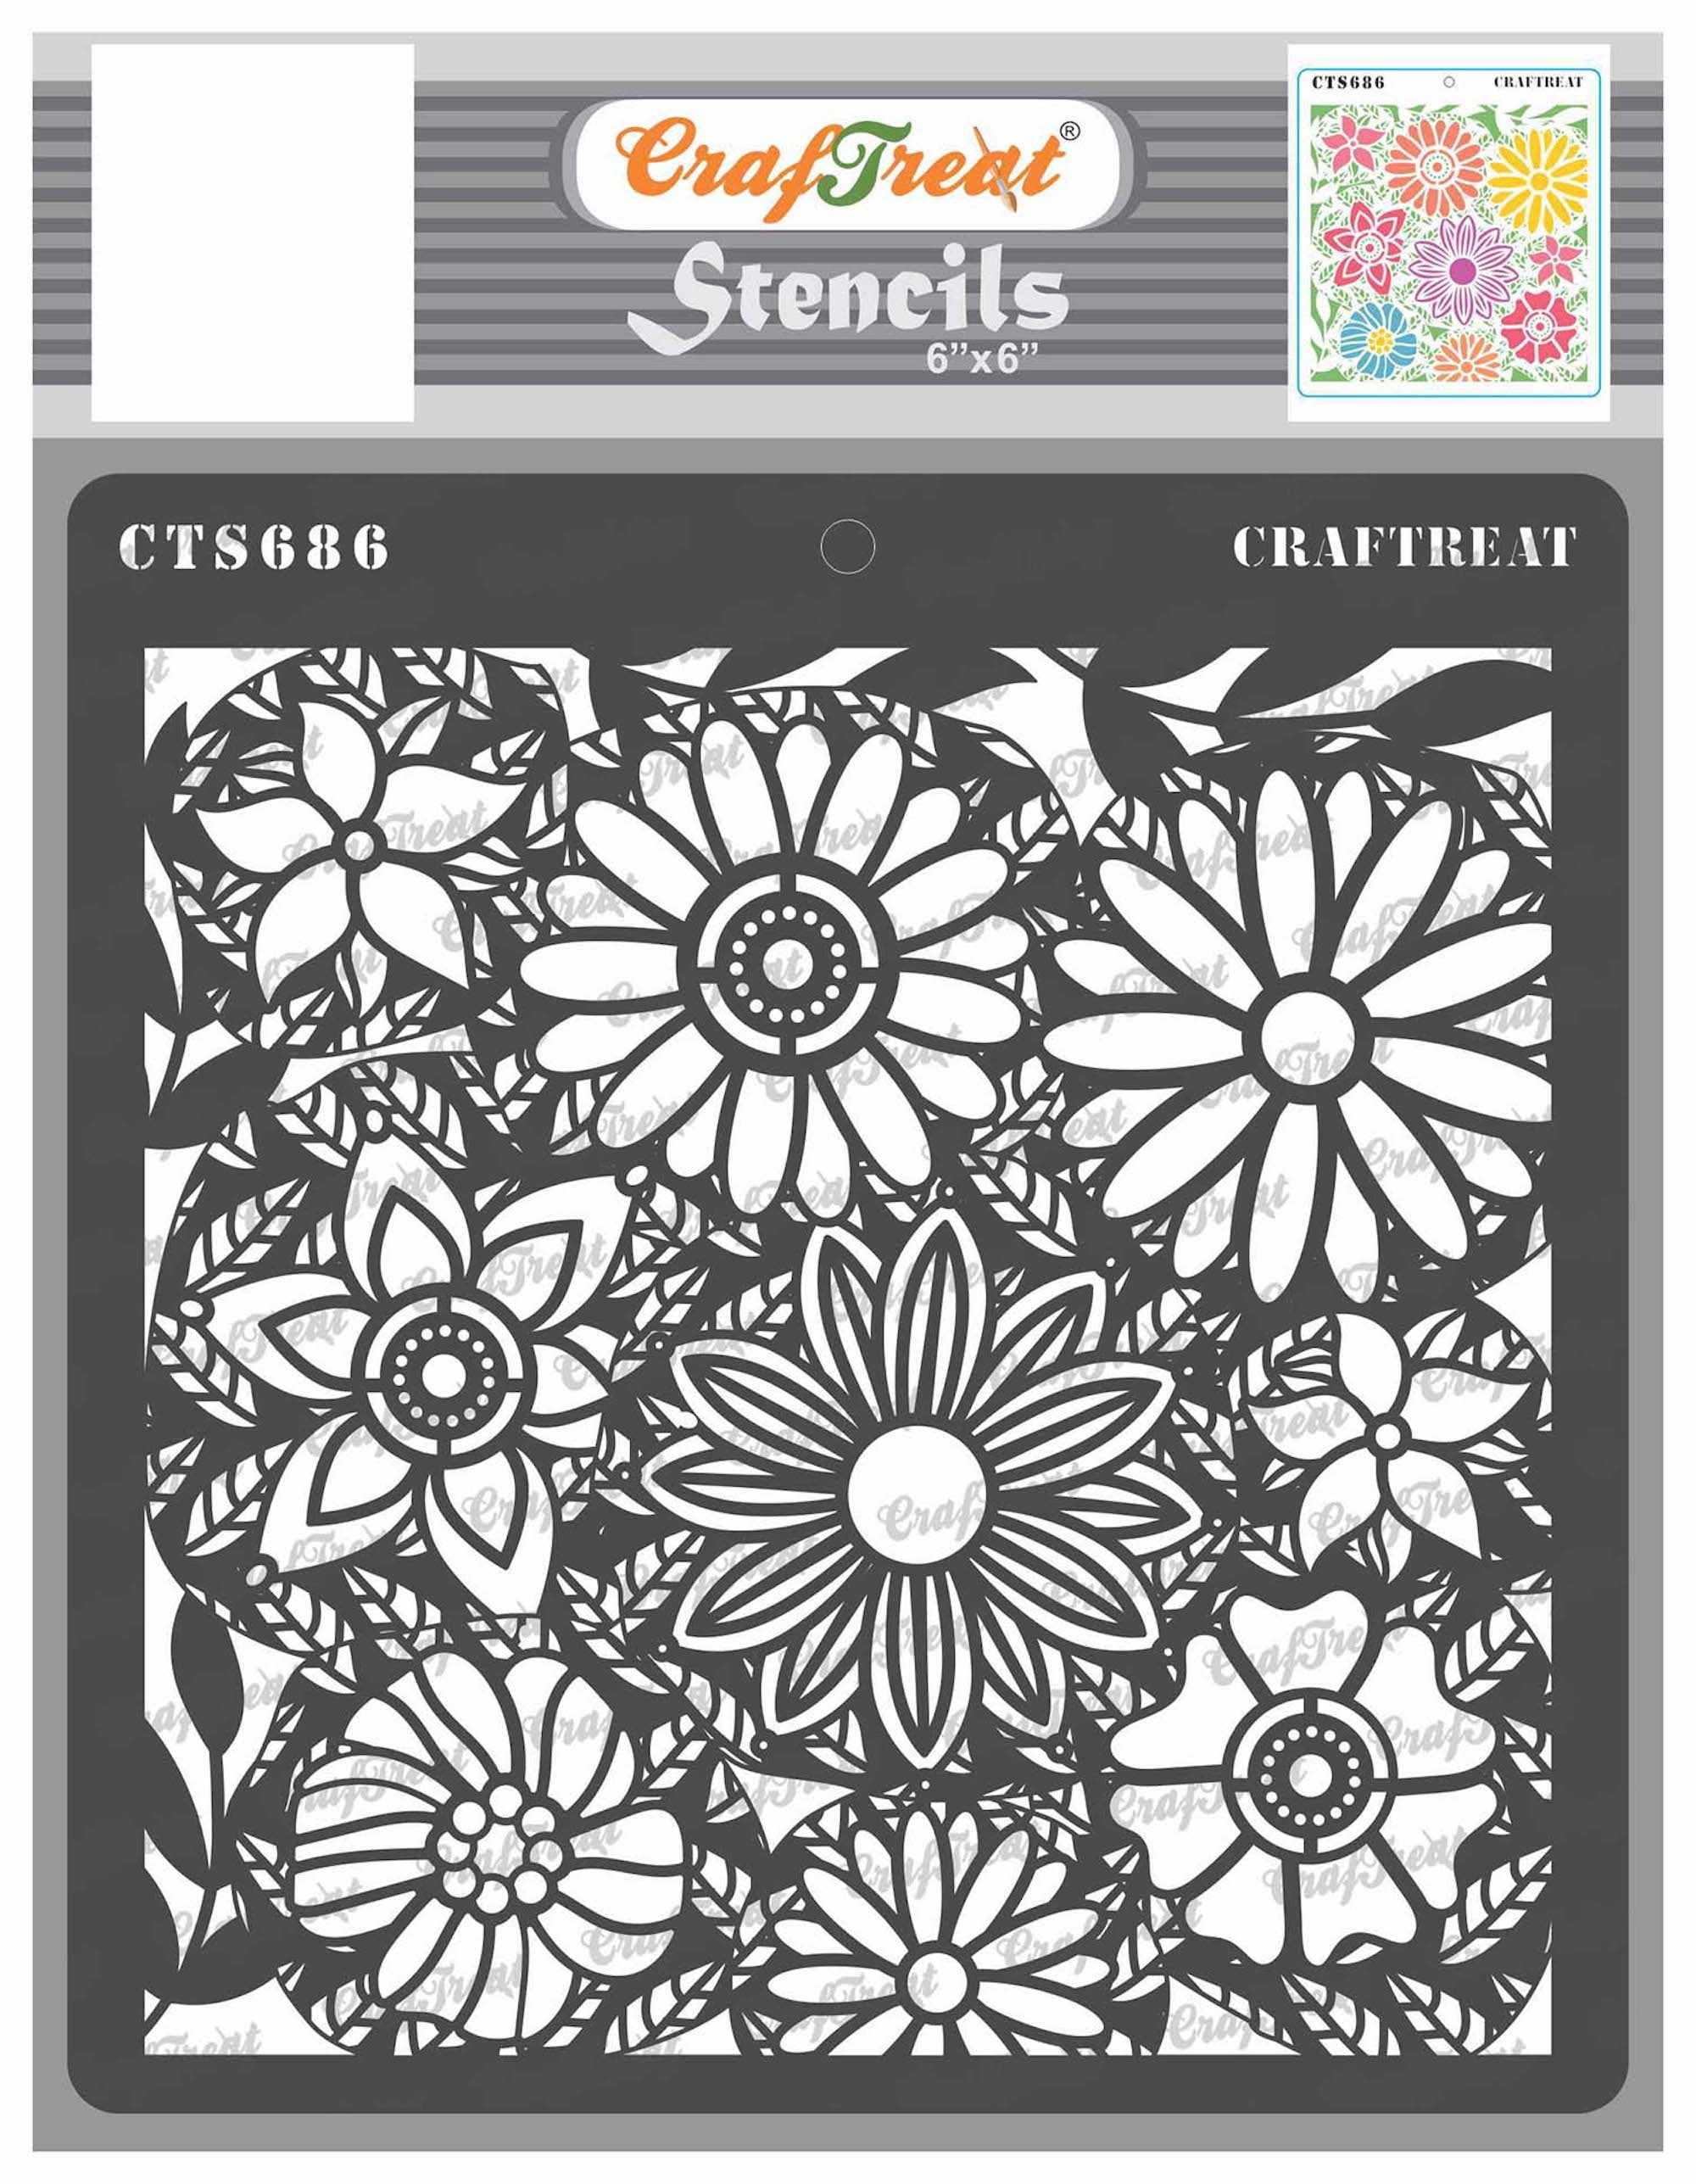 CrafTreat Be Strong Woman Stencil for Journaling and Crafting - 4x8 